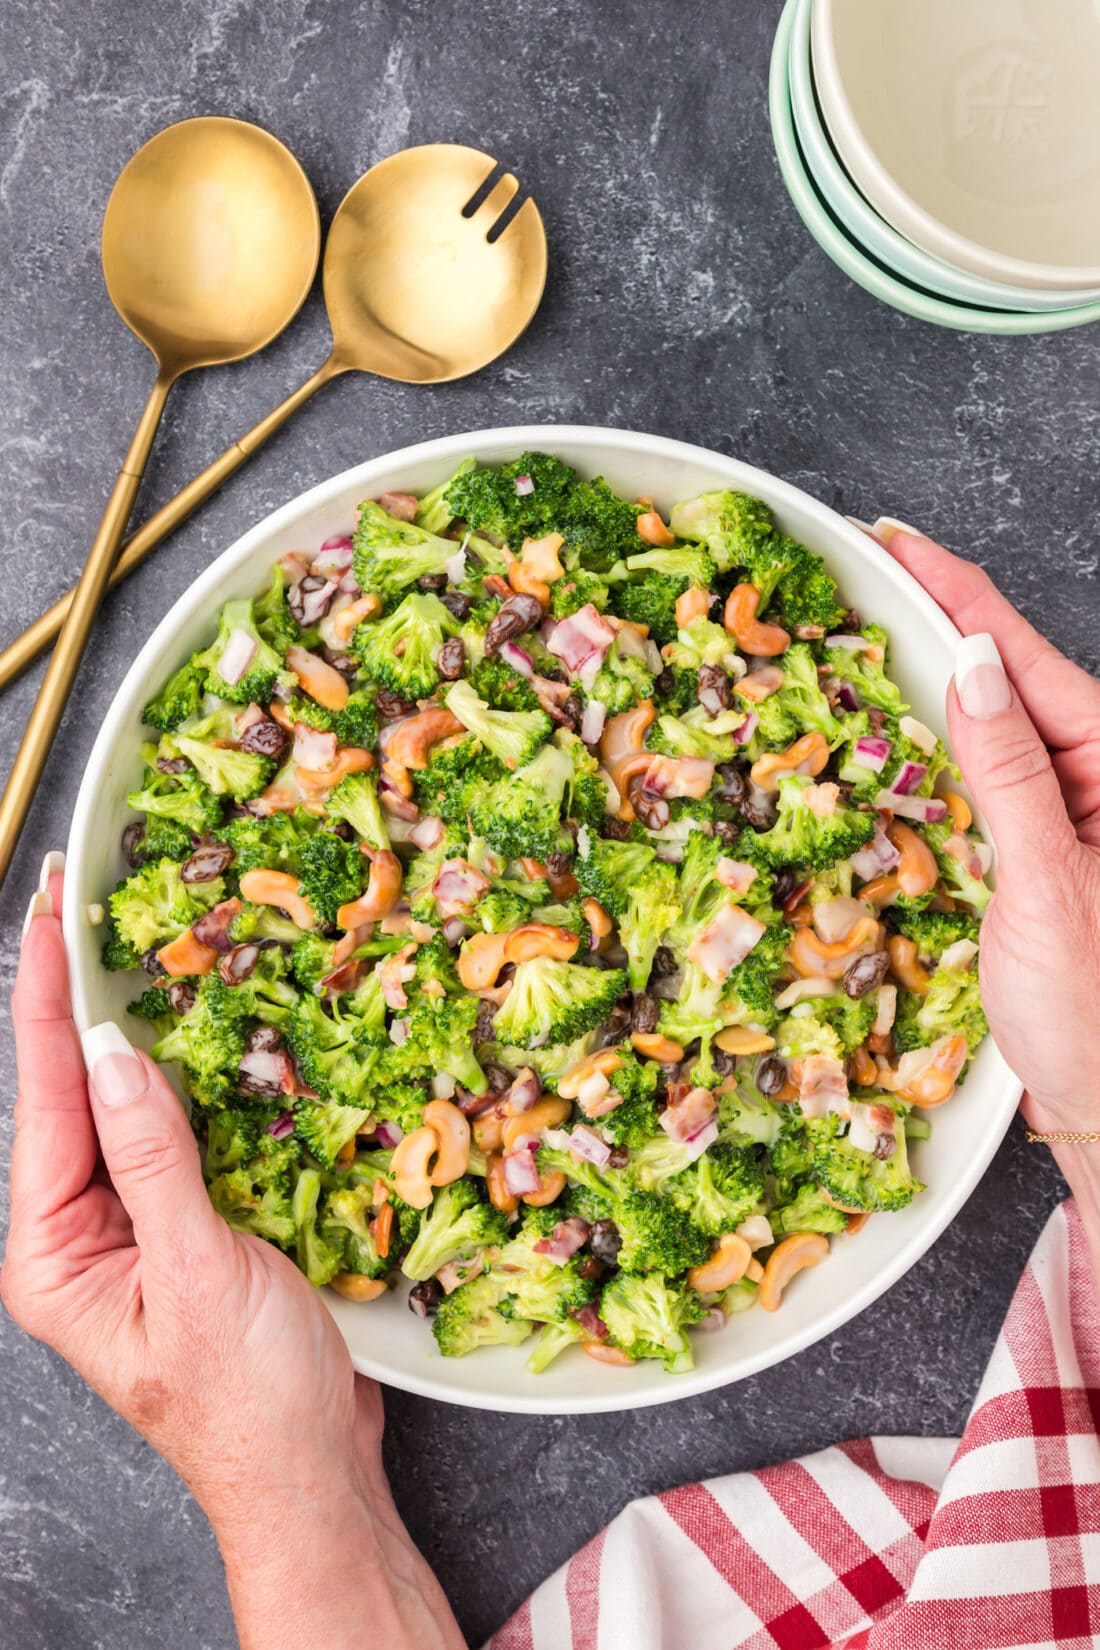 Hands holding a bowl of Broccoli Cashew Salad